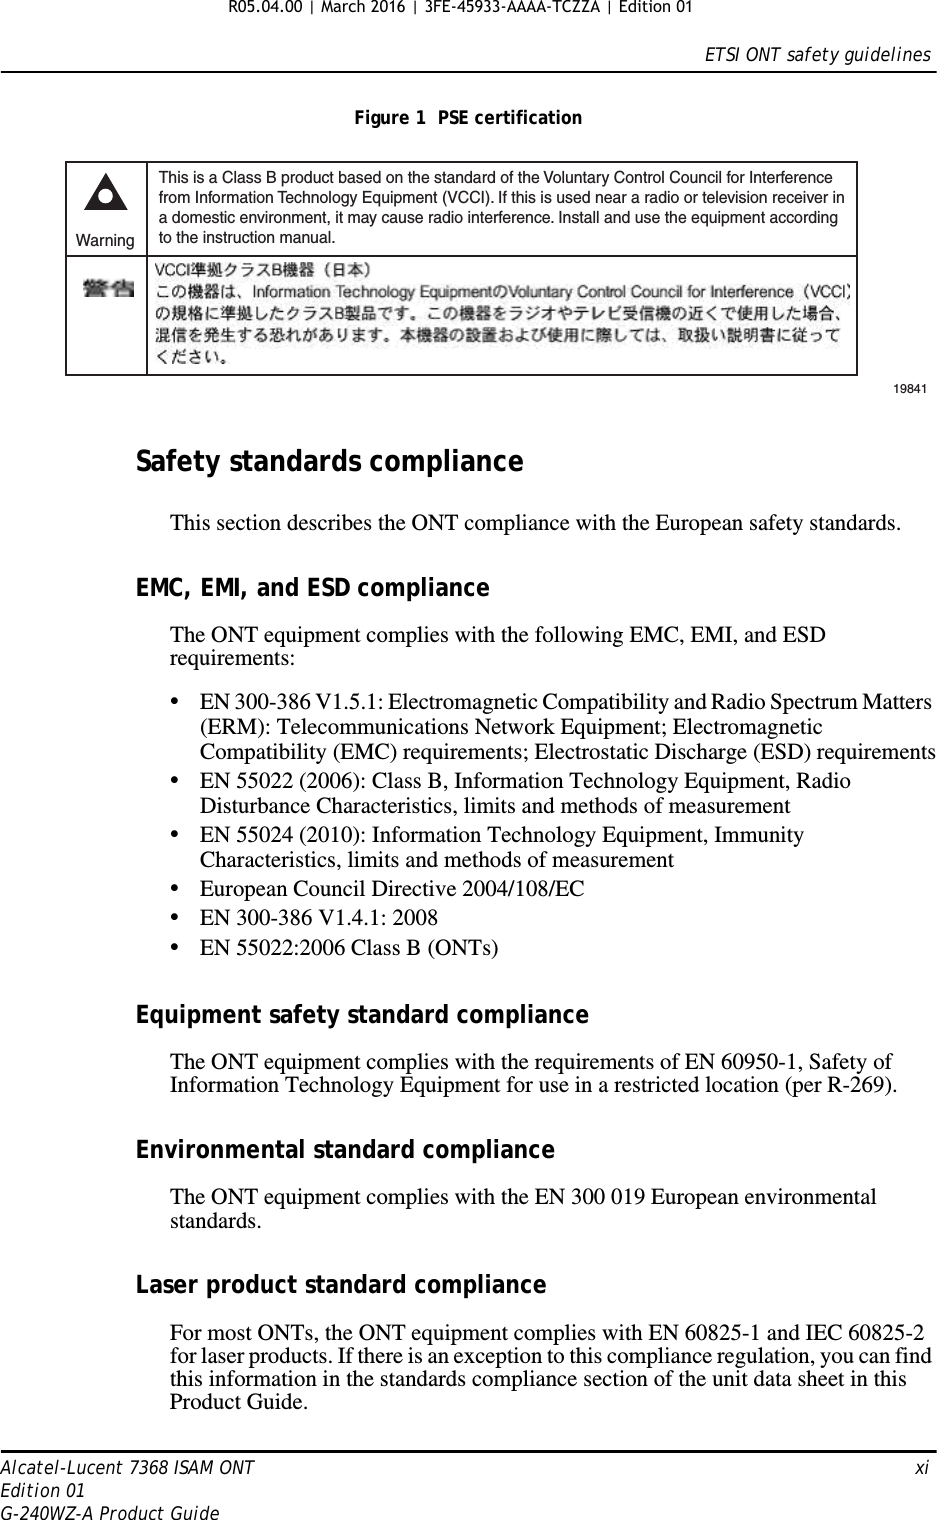 ETSI ONT safety guidelinesAlcatel-Lucent 7368 ISAM ONT   xiEdition 01G-240WZ-A Product GuideFigure 1  PSE certificationSafety standards complianceThis section describes the ONT compliance with the European safety standards.EMC, EMI, and ESD complianceThe ONT equipment complies with the following EMC, EMI, and ESD requirements:•EN 300-386 V1.5.1: Electromagnetic Compatibility and Radio Spectrum Matters (ERM): Telecommunications Network Equipment; Electromagnetic Compatibility (EMC) requirements; Electrostatic Discharge (ESD) requirements•EN 55022 (2006): Class B, Information Technology Equipment, Radio Disturbance Characteristics, limits and methods of measurement•EN 55024 (2010): Information Technology Equipment, Immunity Characteristics, limits and methods of measurement•European Council Directive 2004/108/EC•EN 300-386 V1.4.1: 2008•EN 55022:2006 Class B (ONTs)Equipment safety standard complianceThe ONT equipment complies with the requirements of EN 60950-1, Safety of Information Technology Equipment for use in a restricted location (per R-269).Environmental standard complianceThe ONT equipment complies with the EN 300 019 European environmental standards.Laser product standard complianceFor most ONTs, the ONT equipment complies with EN 60825-1 and IEC 60825-2 for laser products. If there is an exception to this compliance regulation, you can find this information in the standards compliance section of the unit data sheet in this Product Guide.This is a Class B product based on the standard of the Voluntary Control Council for Interferencefrom Information Technology Equipment (VCCI). If this is used near a radio or television receiver ina domestic environment, it may cause radio interference. Install and use the equipment accordingto the instruction manual. Warning19841R05.04.00 | March 2016 | 3FE-45933-AAAA-TCZZA | Edition 01 